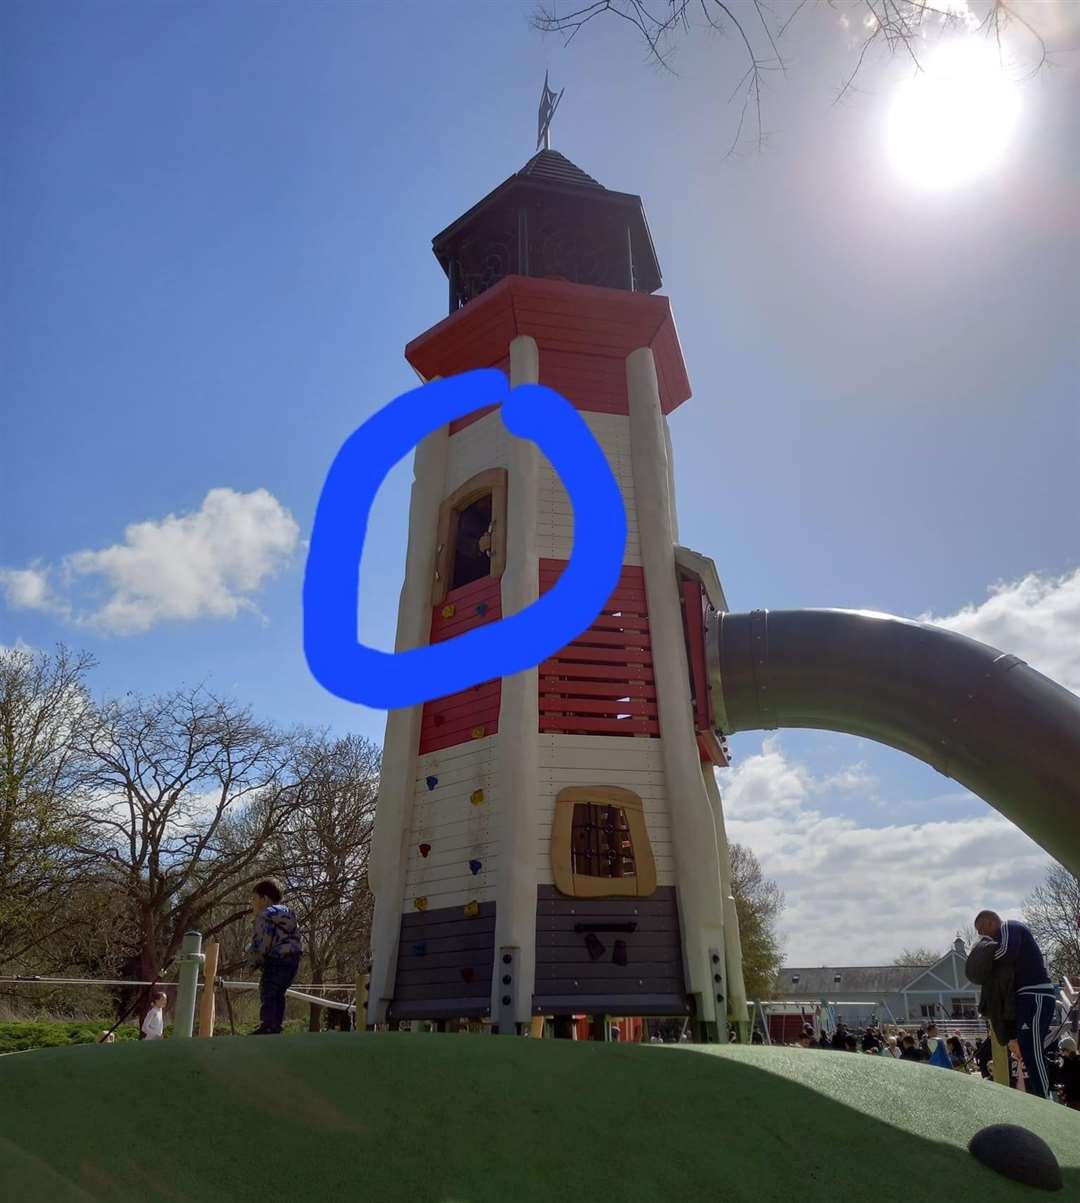 Parents were concerned small children could fall out of the window in the new lighthouse feature at Buccaneer Bay in Dartford